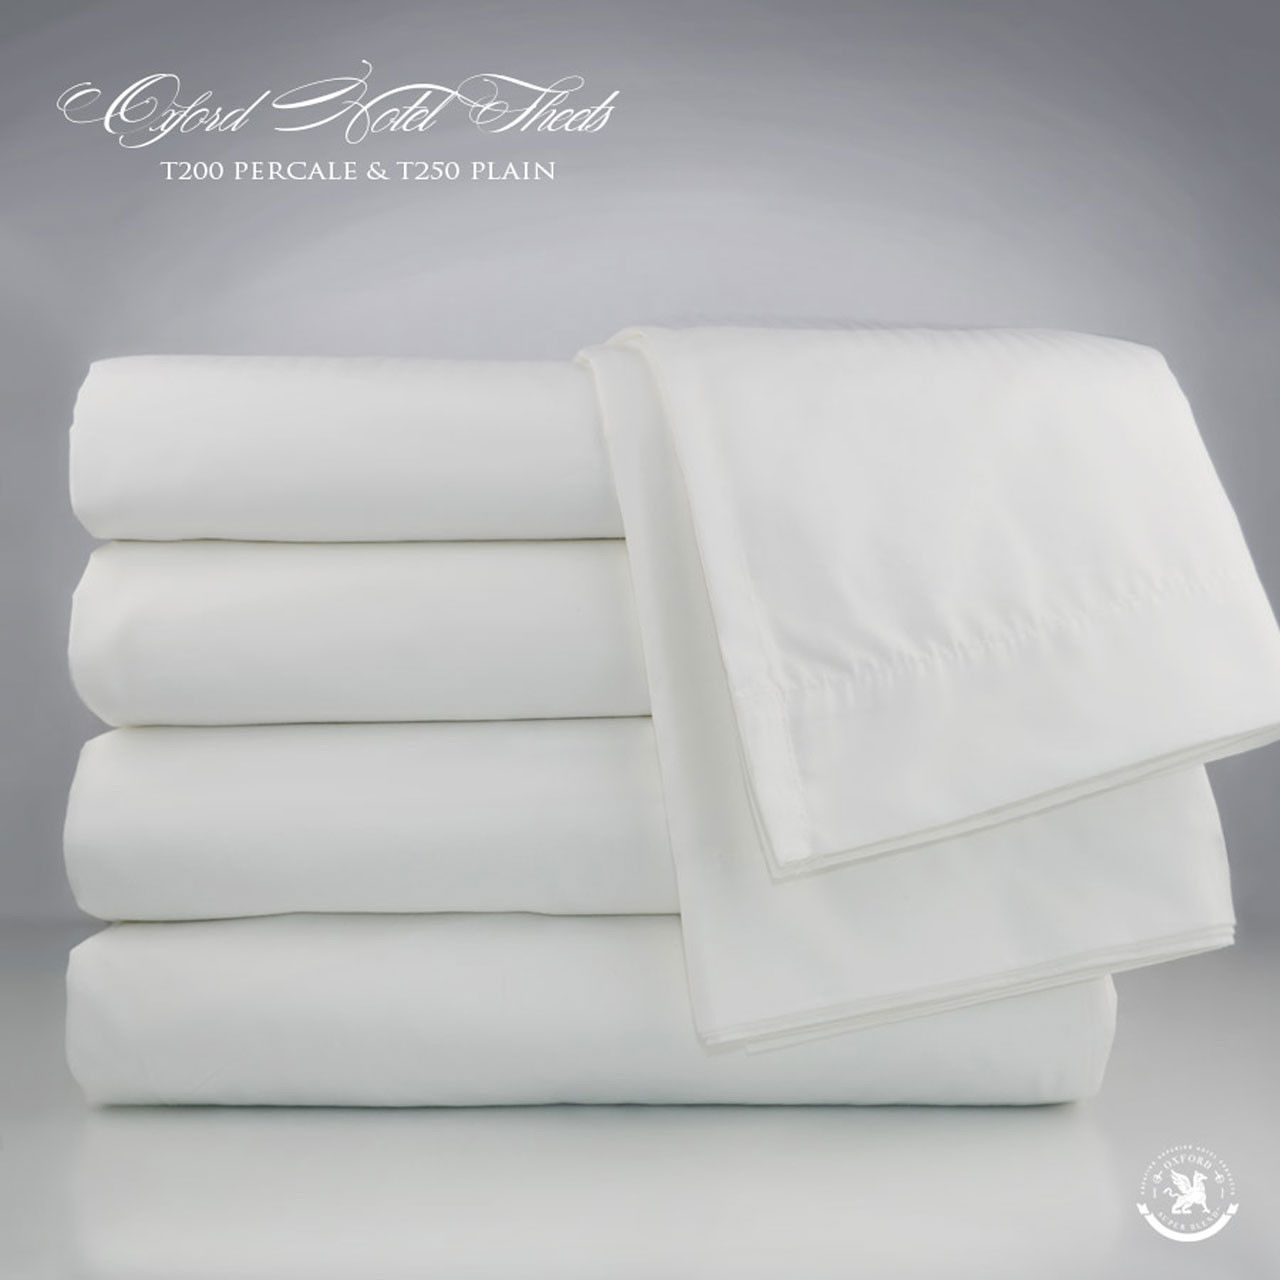 What fabric is used in the Oxford Super Blend T-250 hotel sheets?